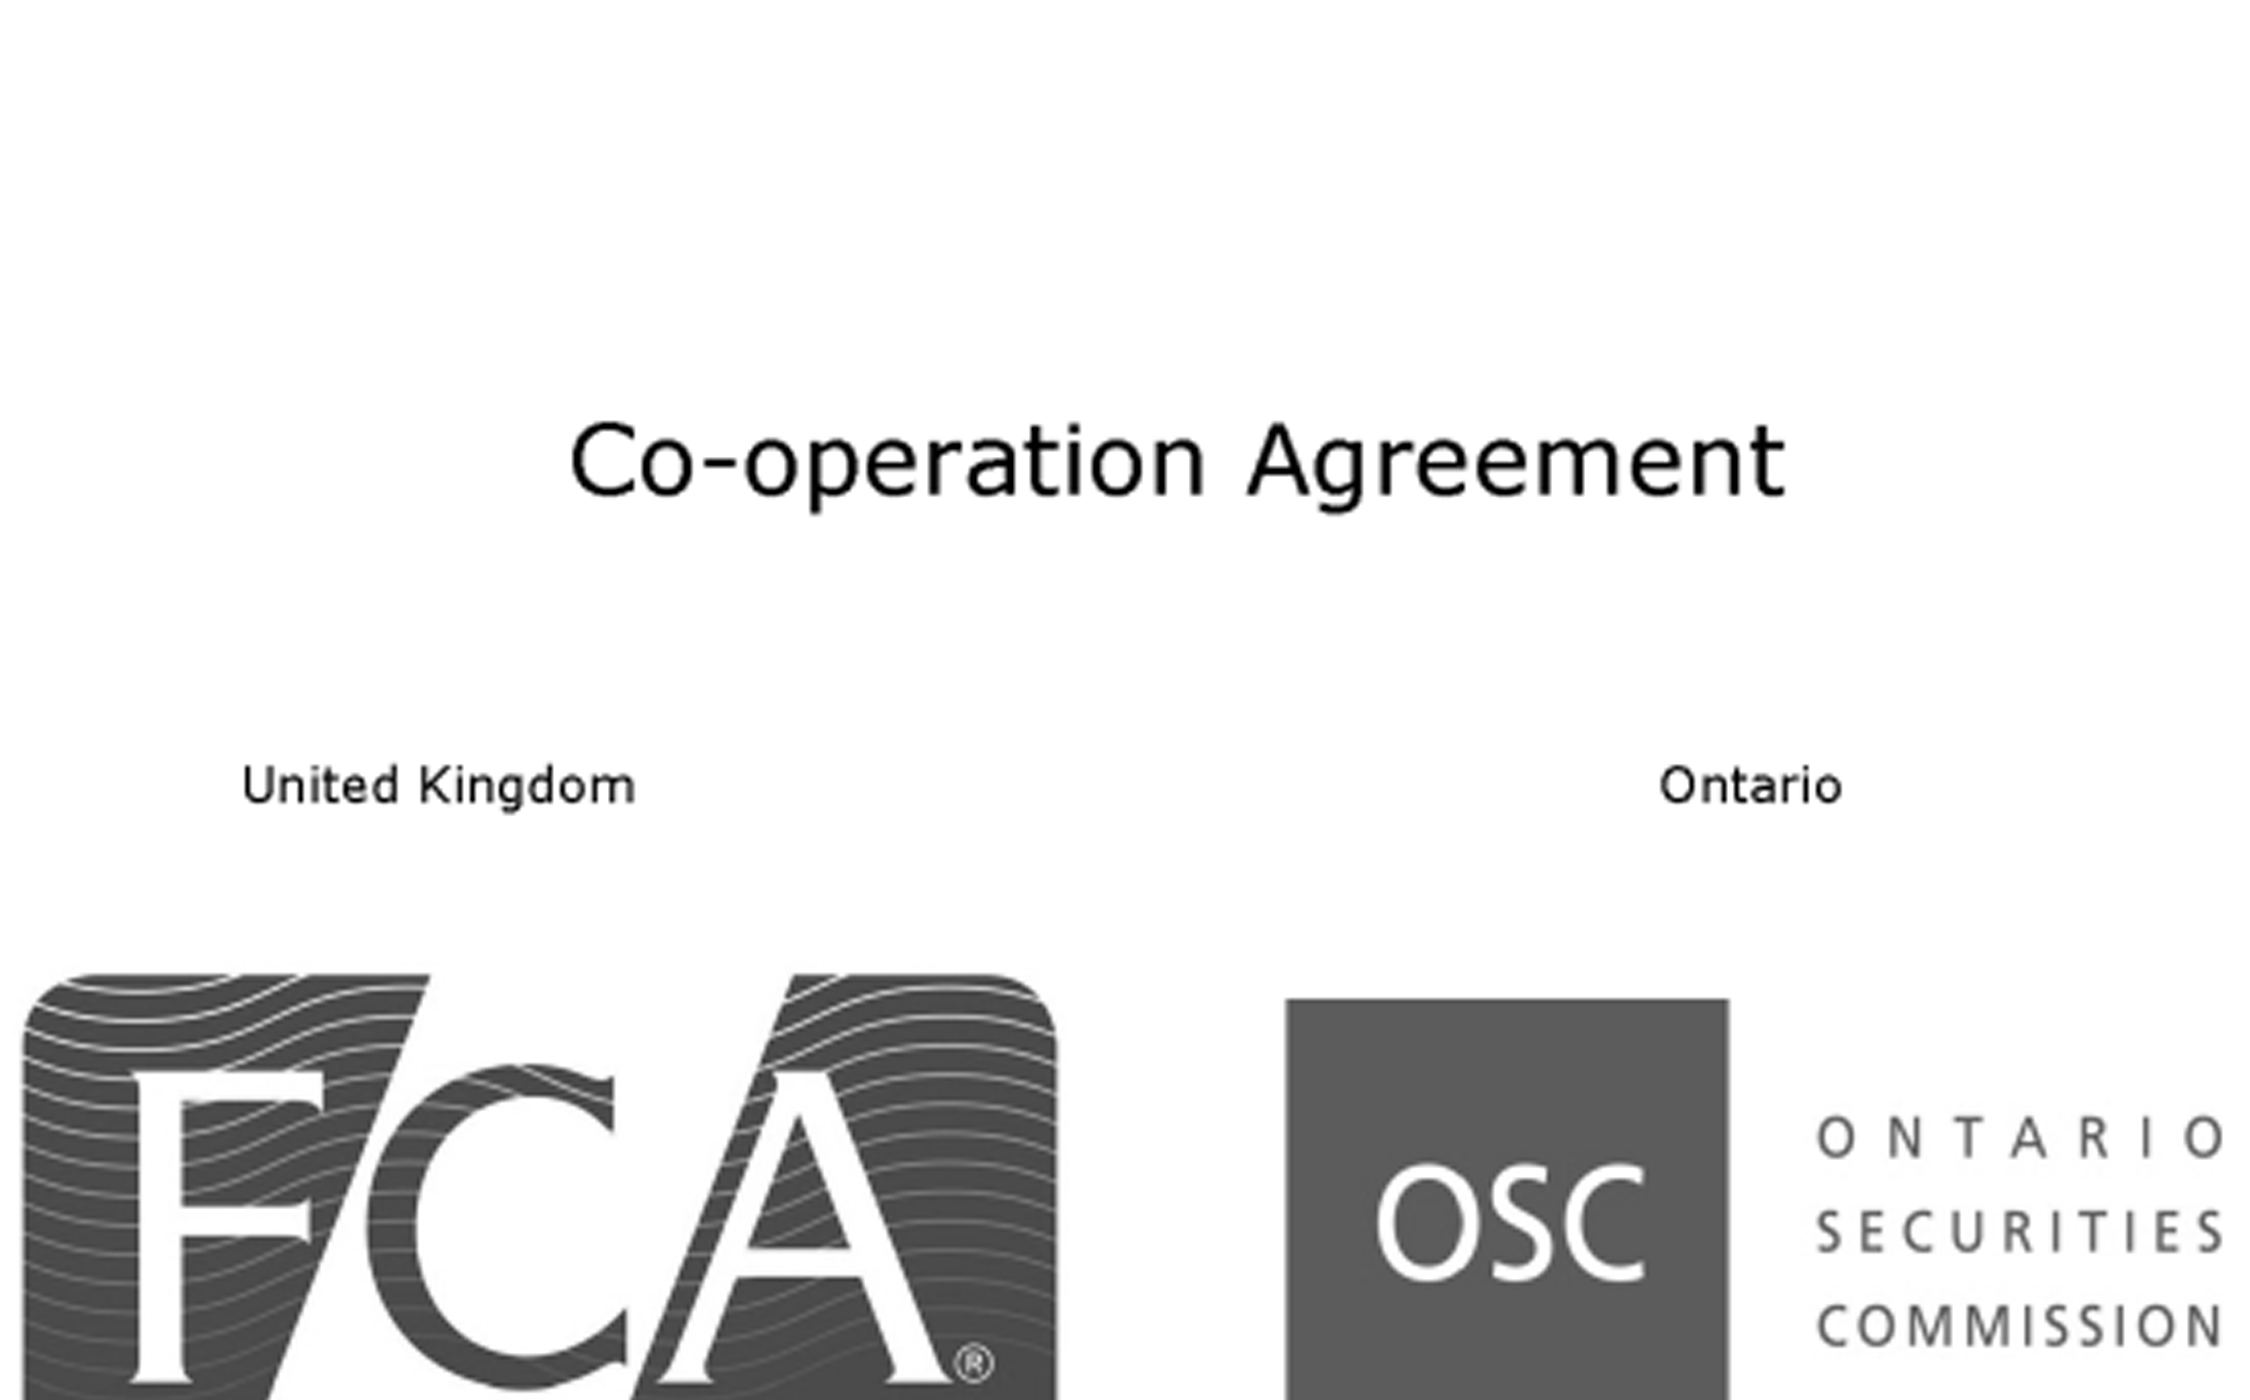 Co-operation Agreement